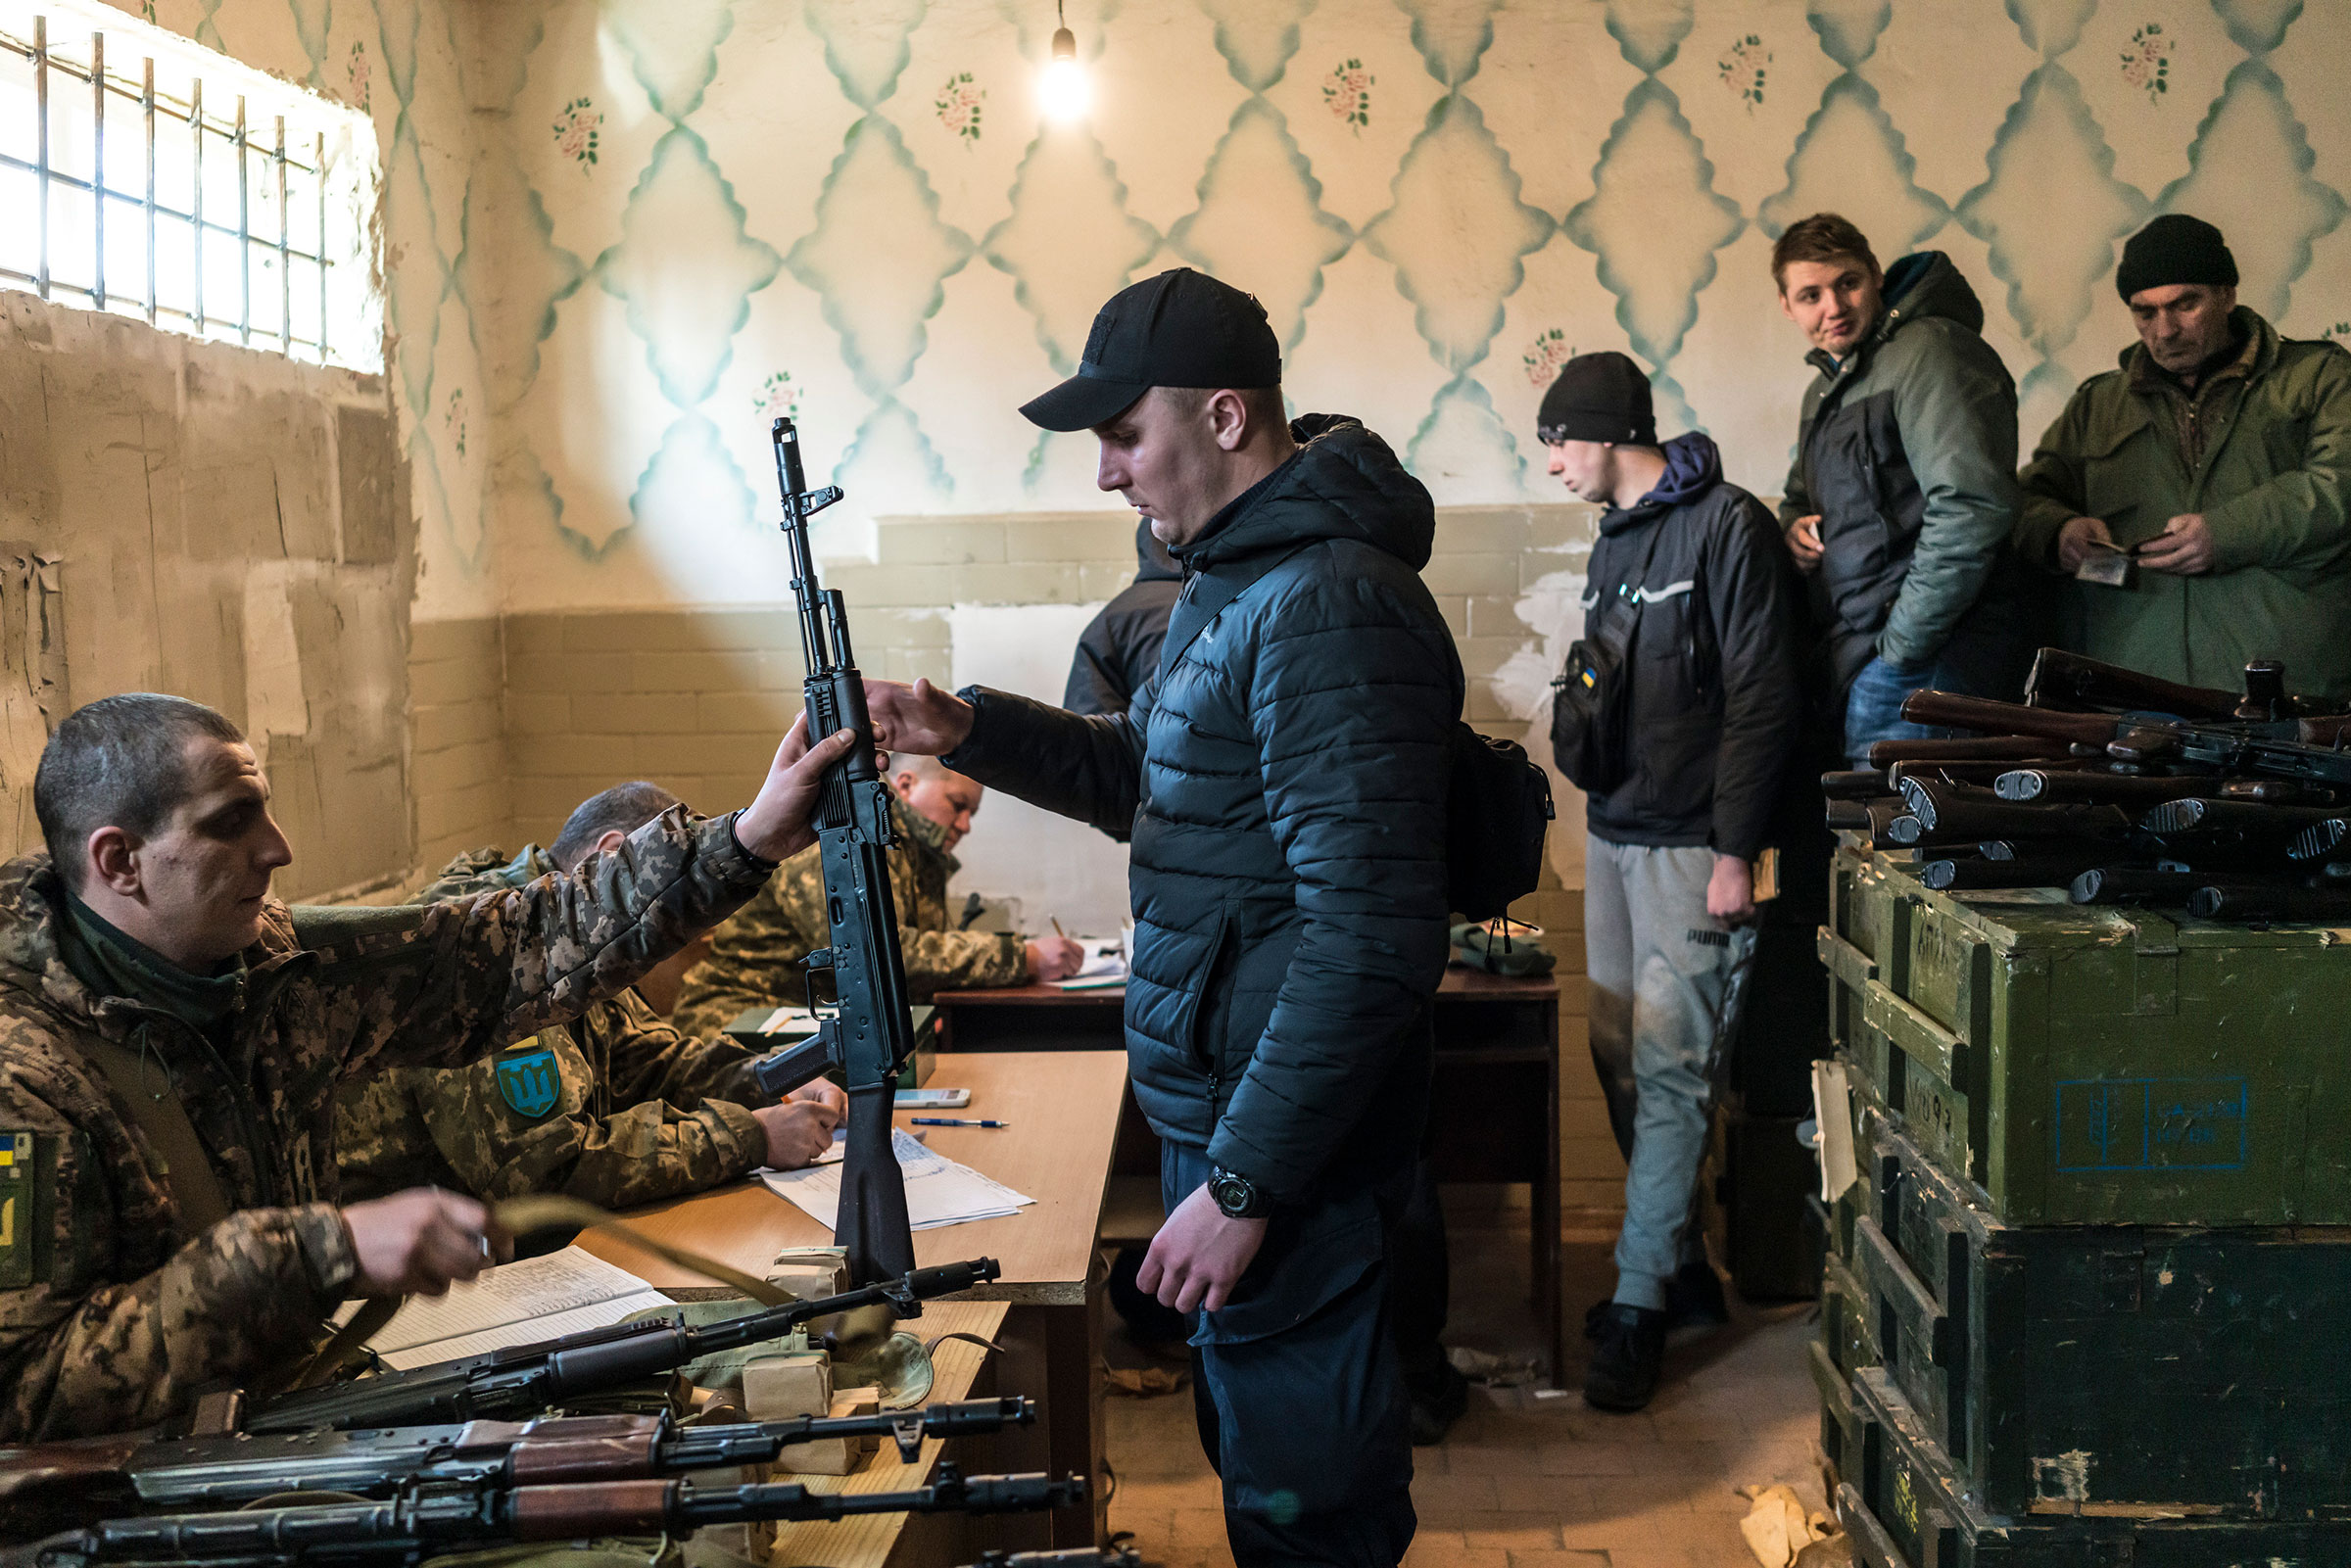 Ukrainian military volunteers recieve weapons at a weapons storage facility in Fastiv, Ukraine, Feb. 25, 2022. (Brendan Hoffman/The New York Times)